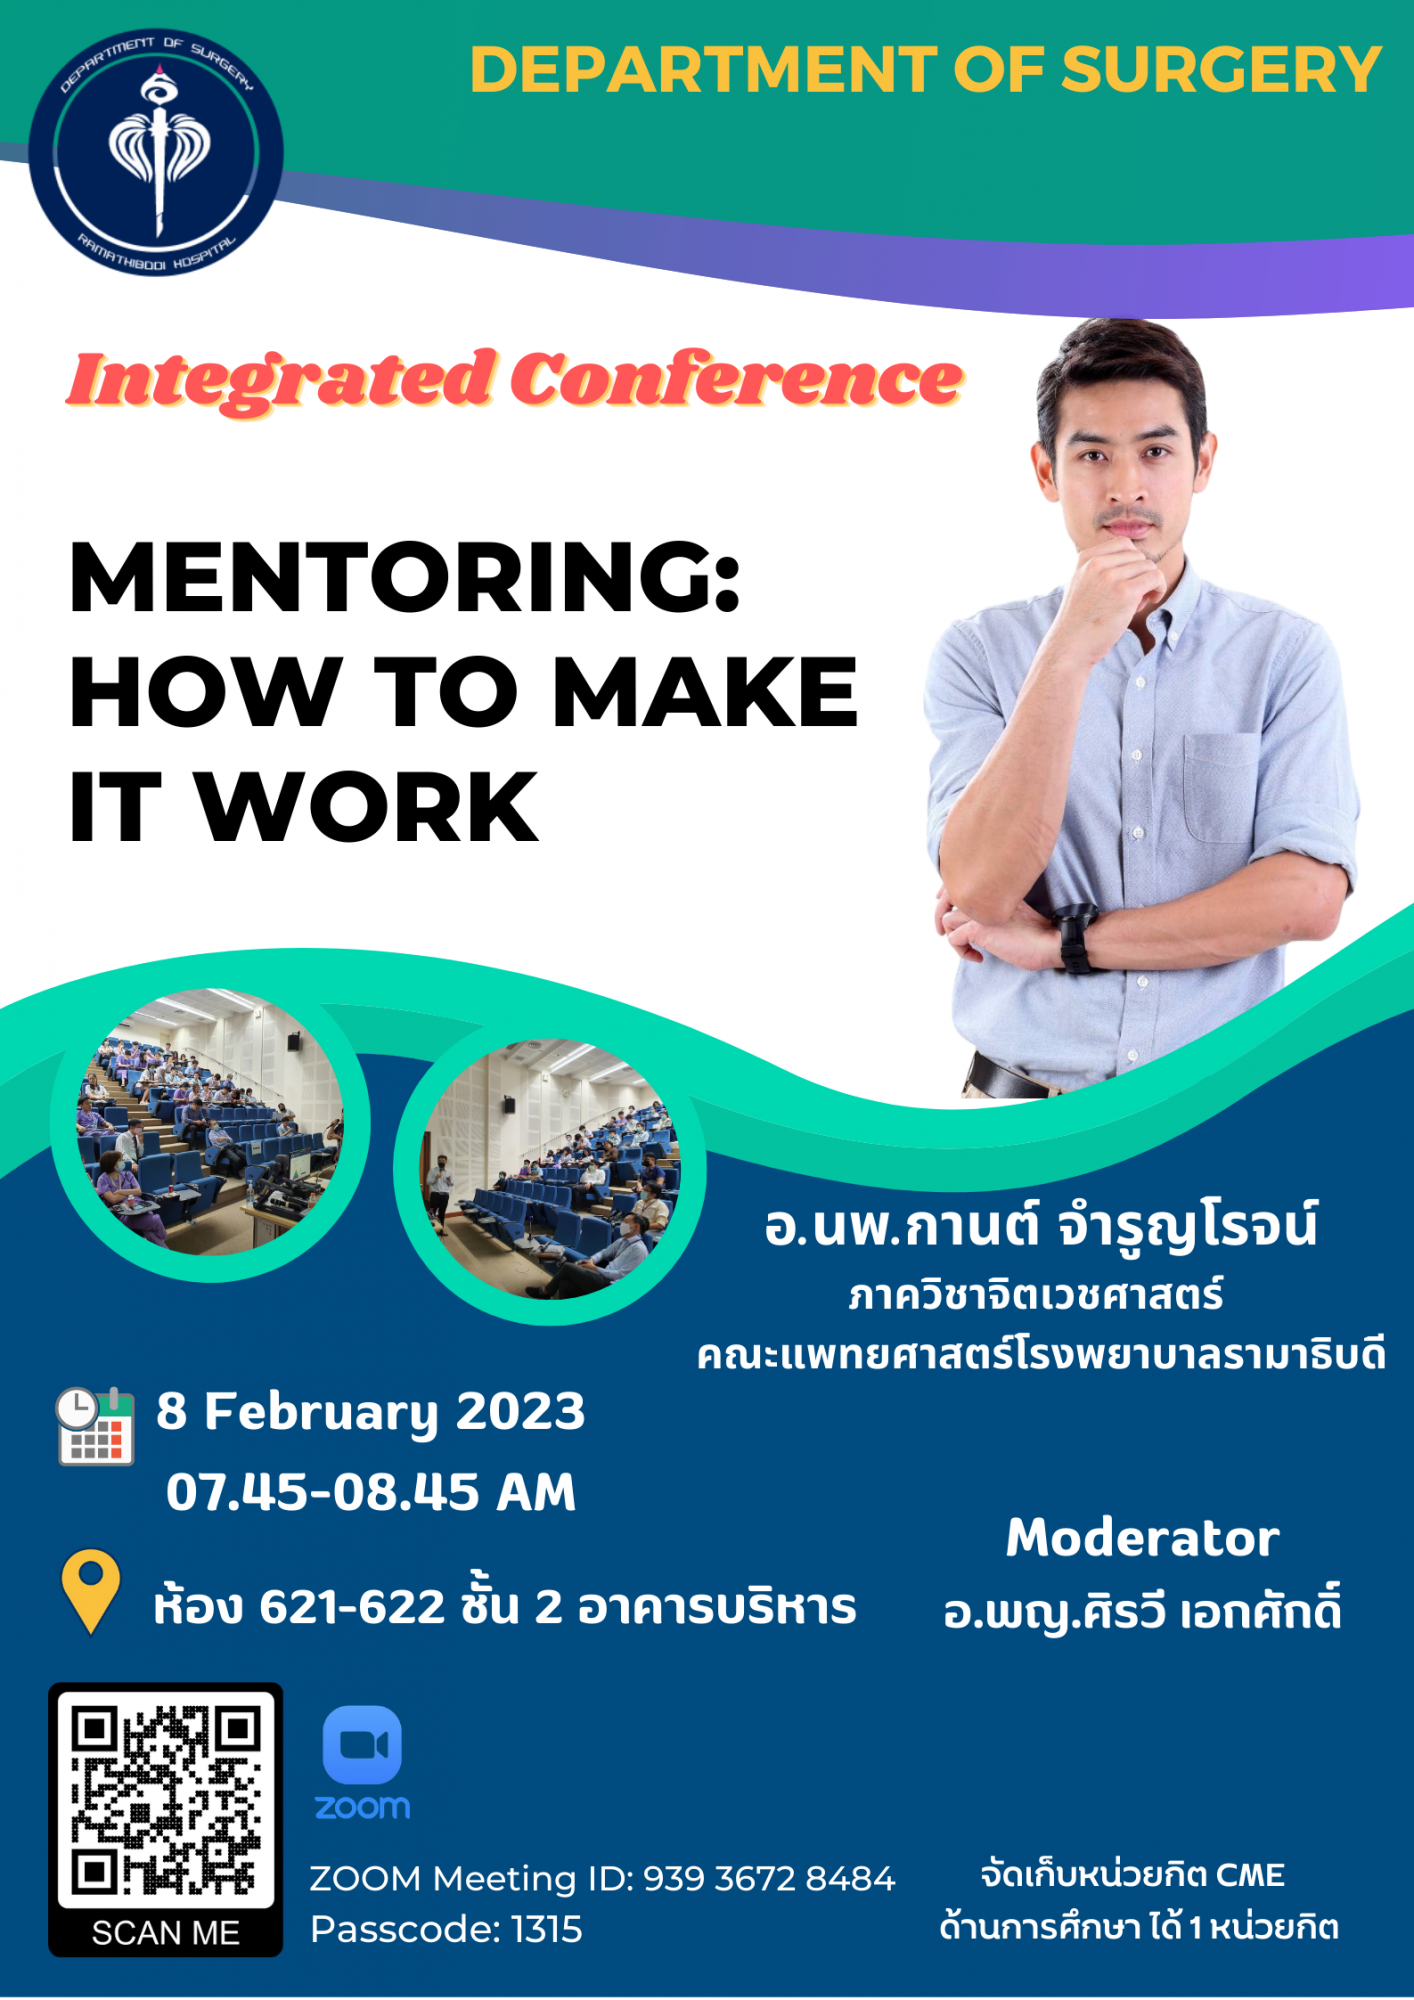 Integrated Conference: "Mentoring: How to make it work"